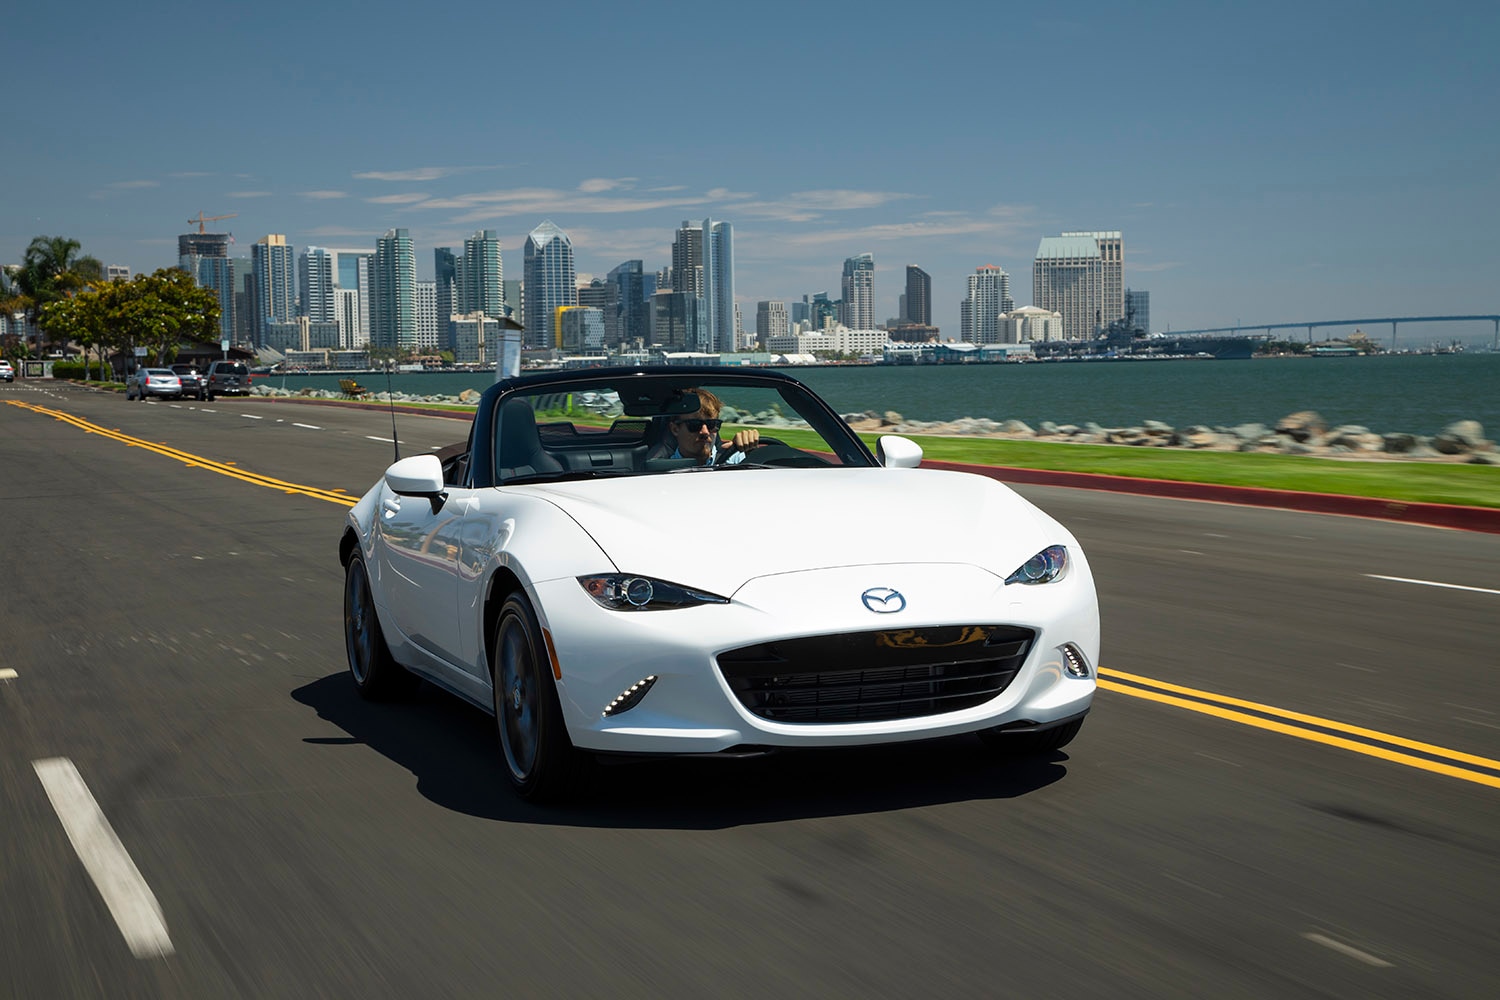 2023 Mazda MX-5 Miata in white driving along the coast with a city skyline in the background